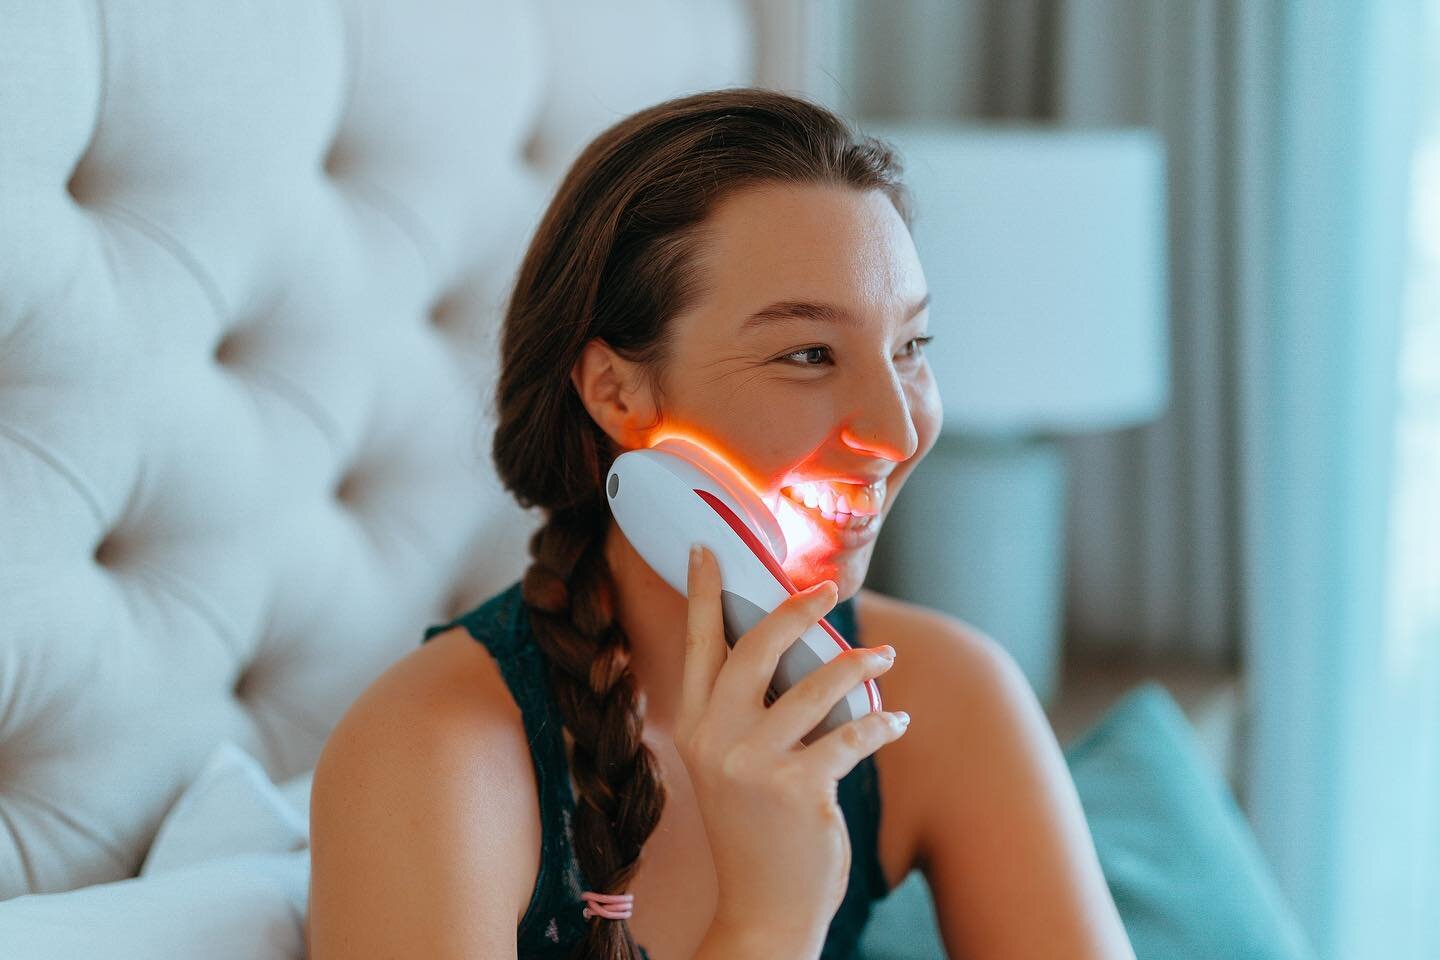 Have you ever wondered what LED light therapy is?

LED stands for Light-Emitting Diode.

These small lights (also found around the house in  items like digital alarm clocks) emit light energy which can be harnessed for a number  of benefits. In the 1